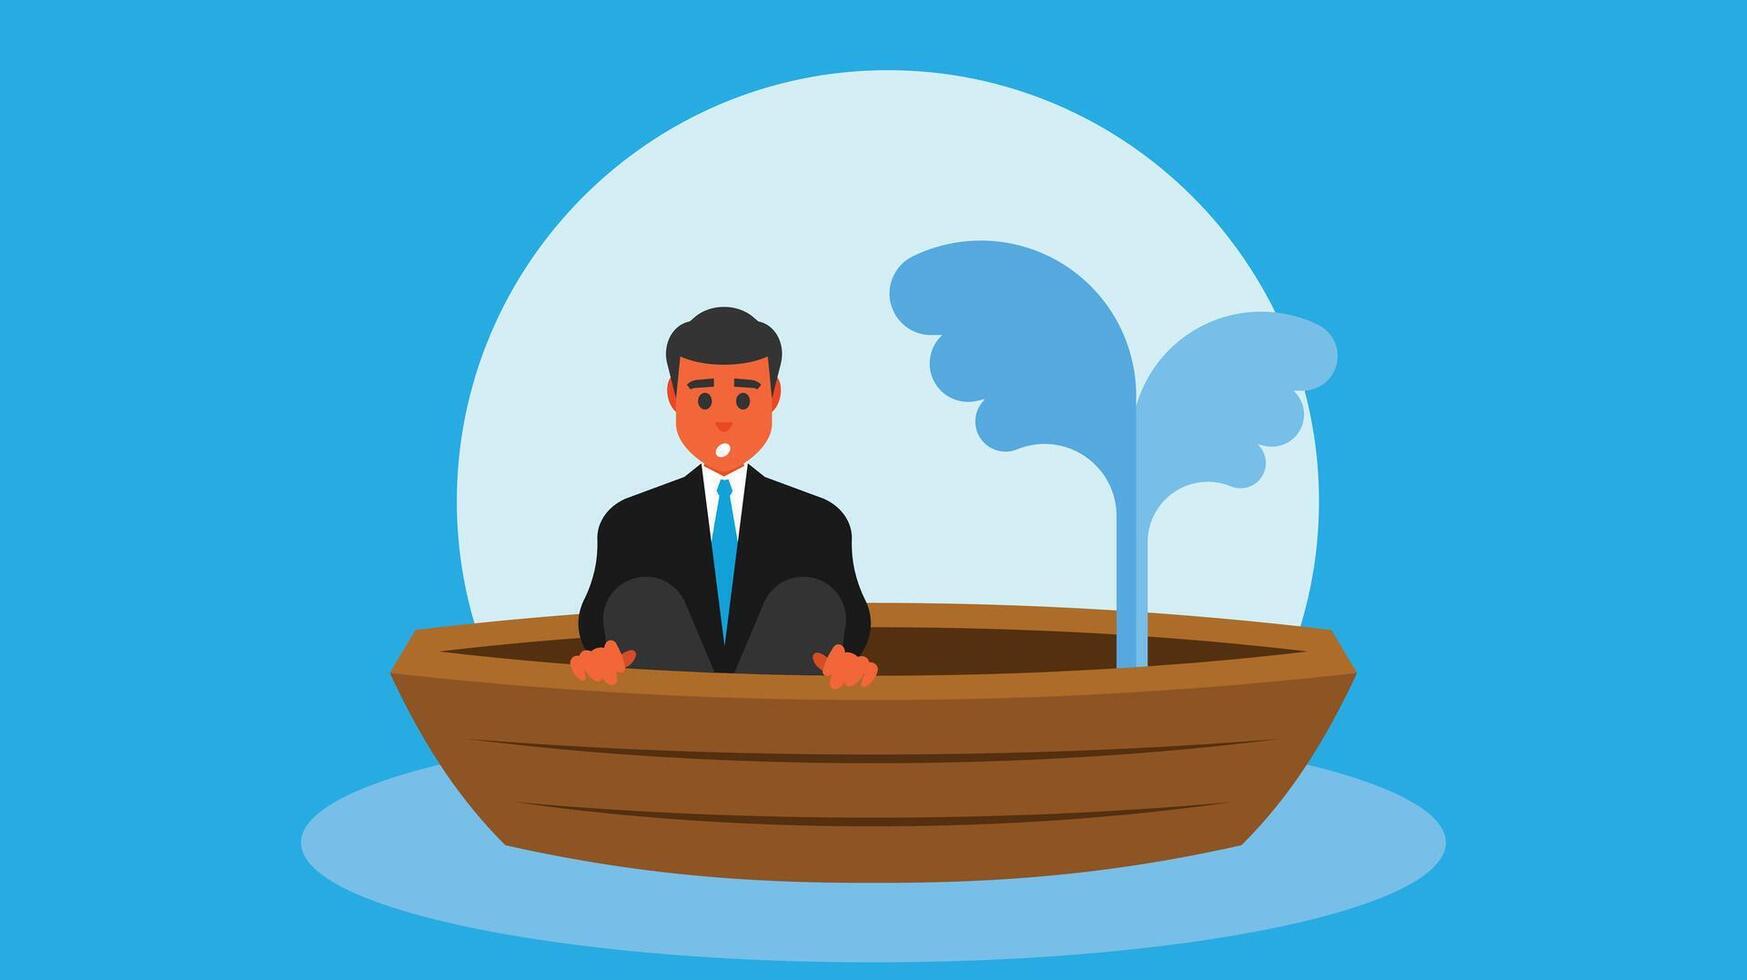 business man in a boat sinking with water coming in vector illustration